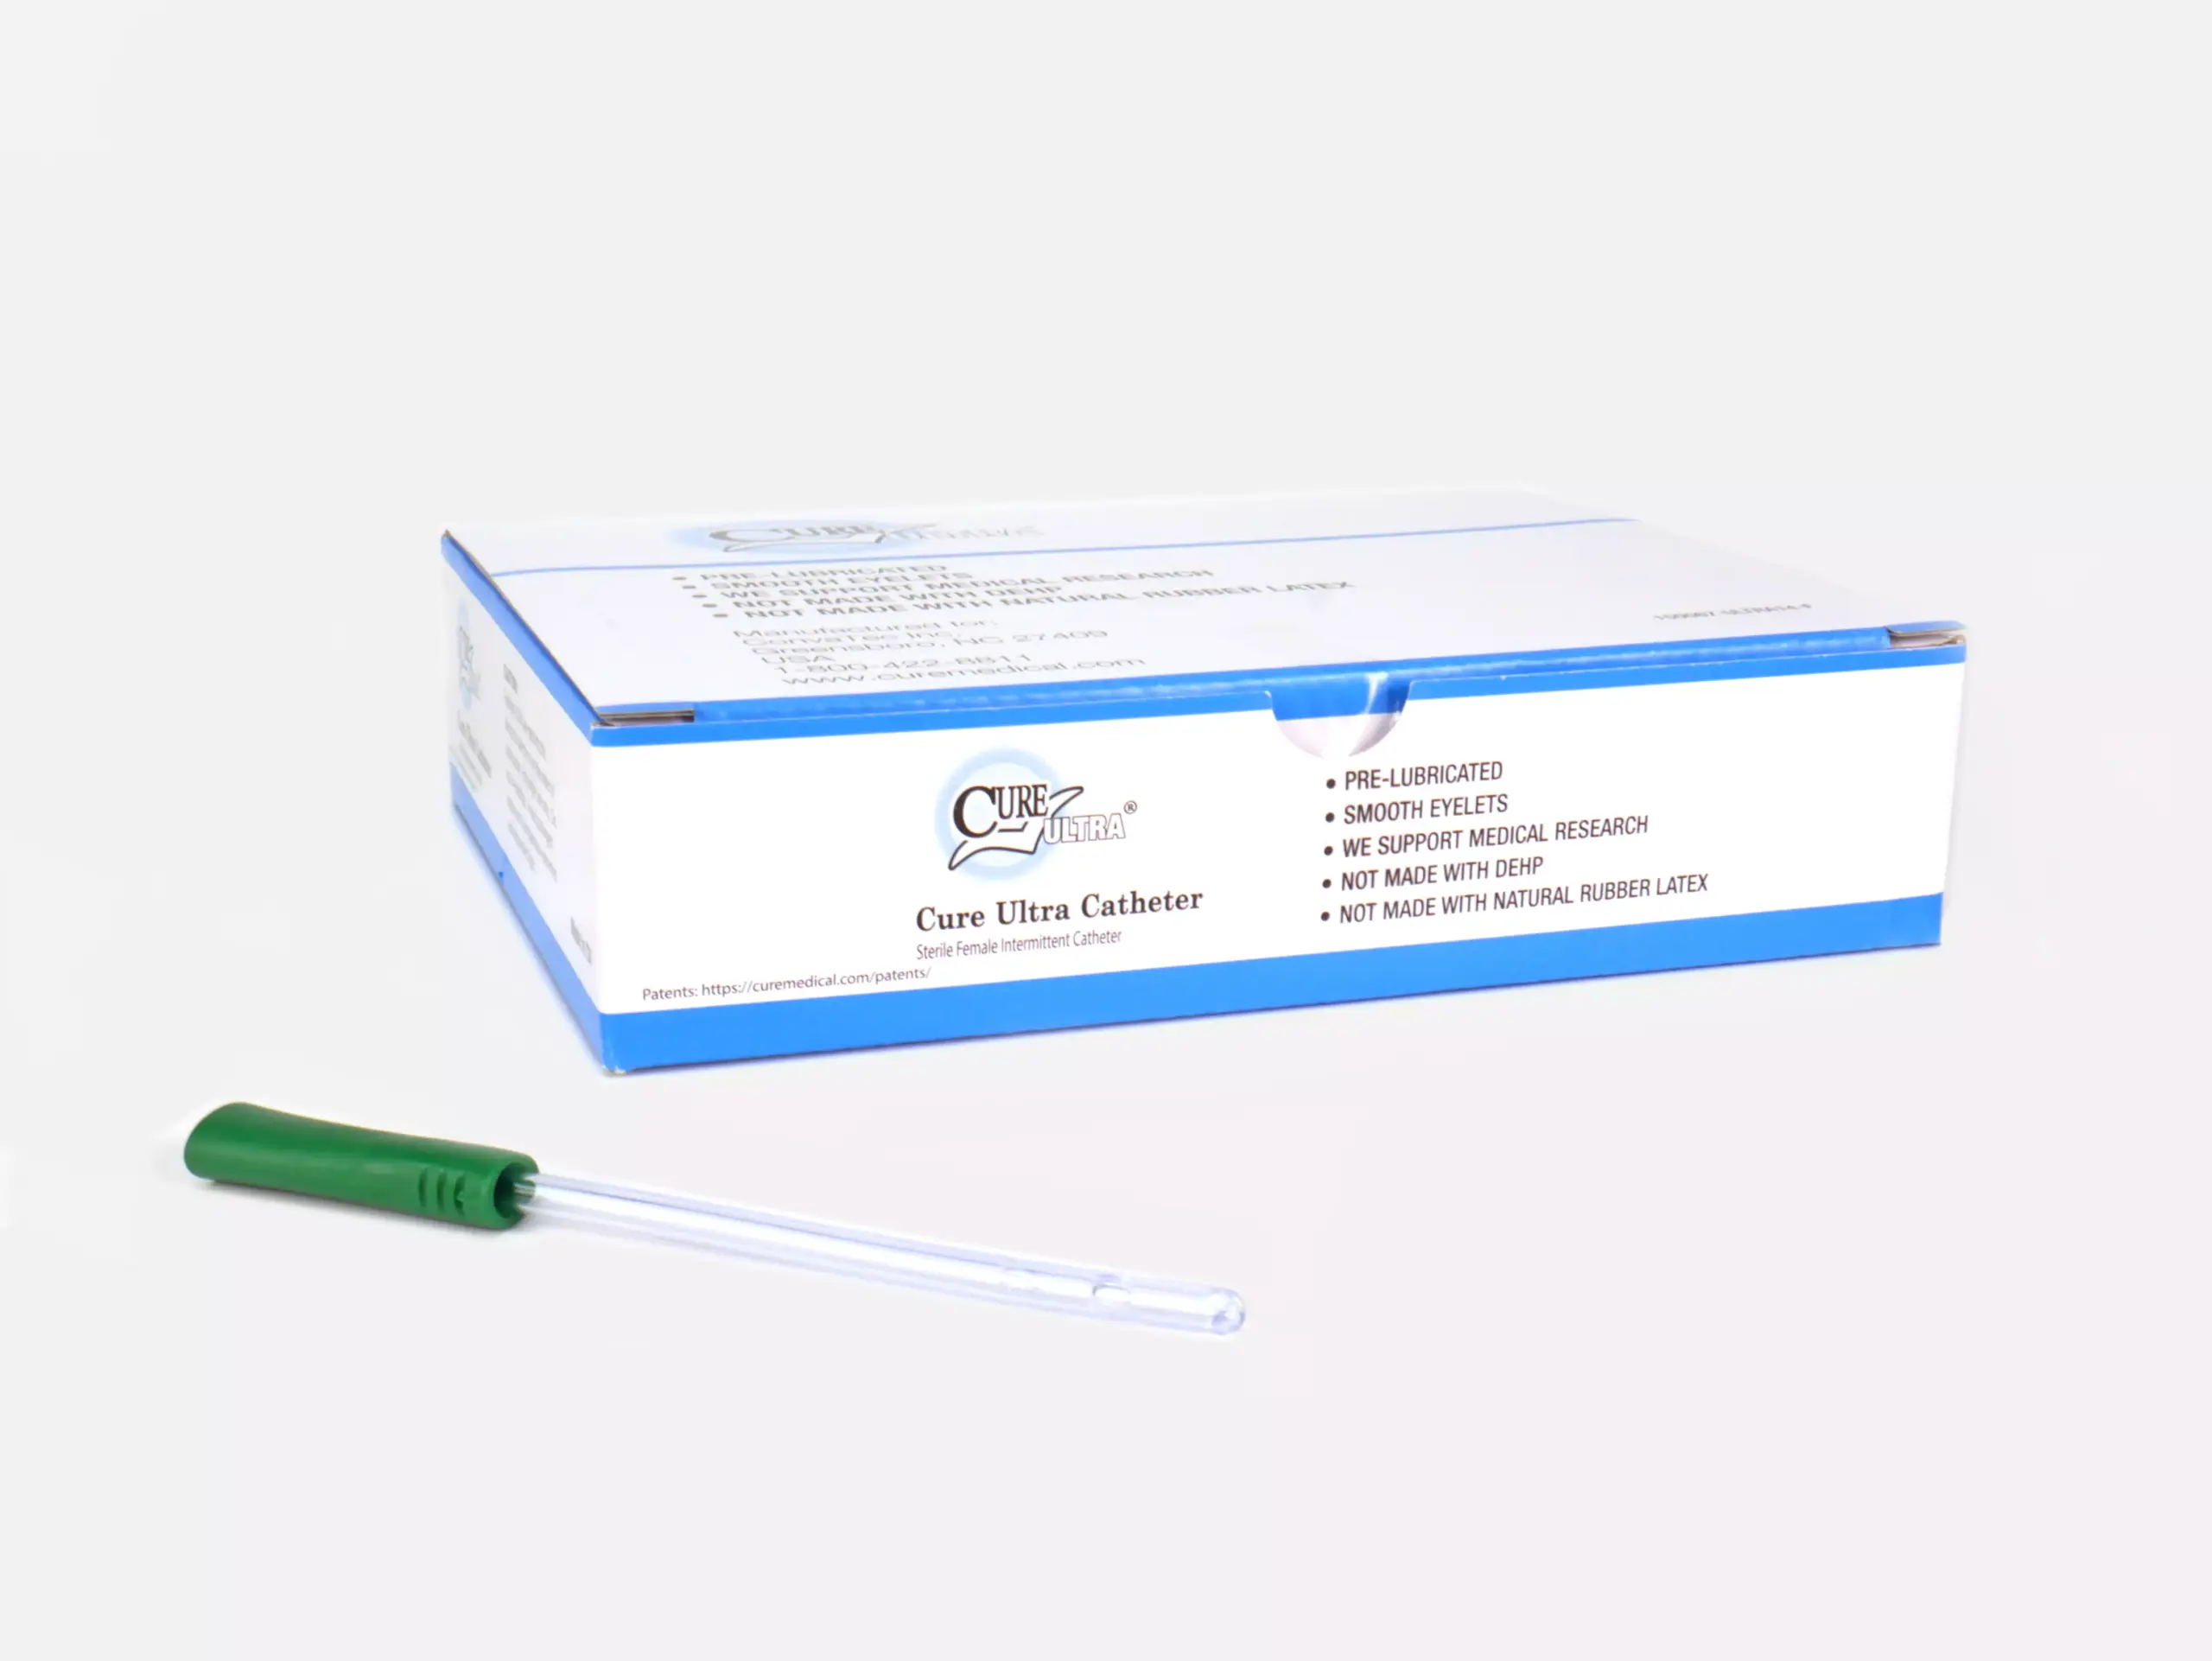 Image featuring a box of Cure Ultra pre-lubricated catheters from RA Fischer. In front of the box is one of the catheters with a green grip. Box reads 'CURE ULTRA,' 'PRE-LUBRICATED,' 'SMOOTH EYELETS,' 'WE SUPPORT MEDICAL RESEARCH,' 'NOT MADE WITH DEHP,' 'NOT MADE WITH NATURAL RUBBER LATEX.'